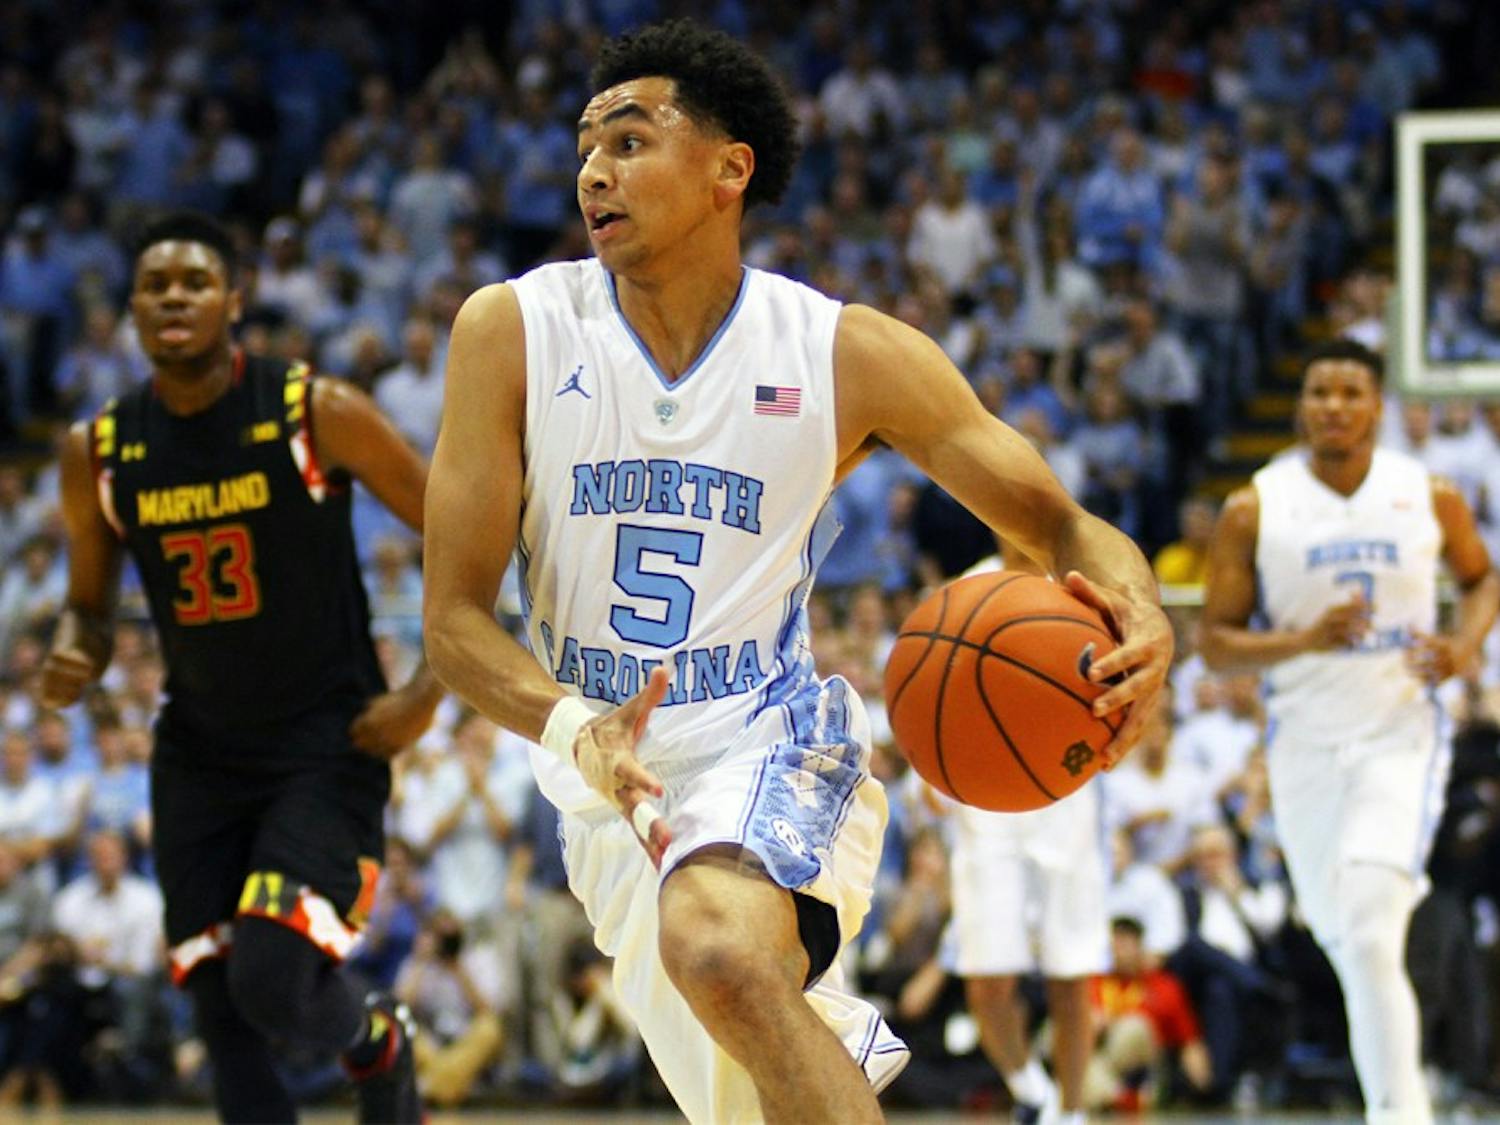 Senior guard Marcus Paige (5) drives the ball towards the basket. This was Paige’s first game back after suffering a fracture to his non-shooting hand.